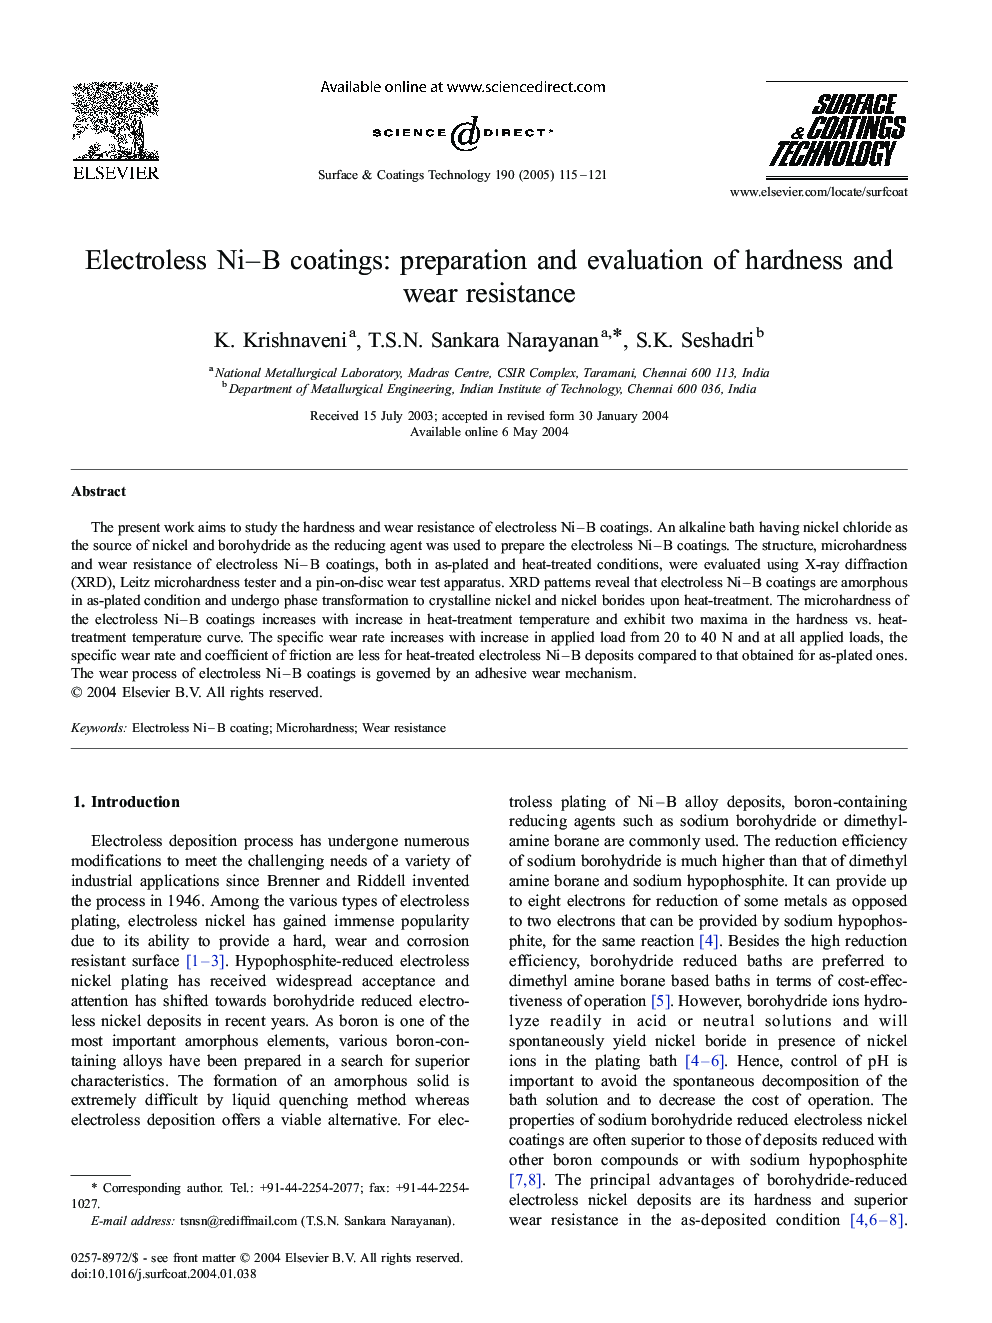 Electroless Ni-B coatings: preparation and evaluation of hardness and wear resistance